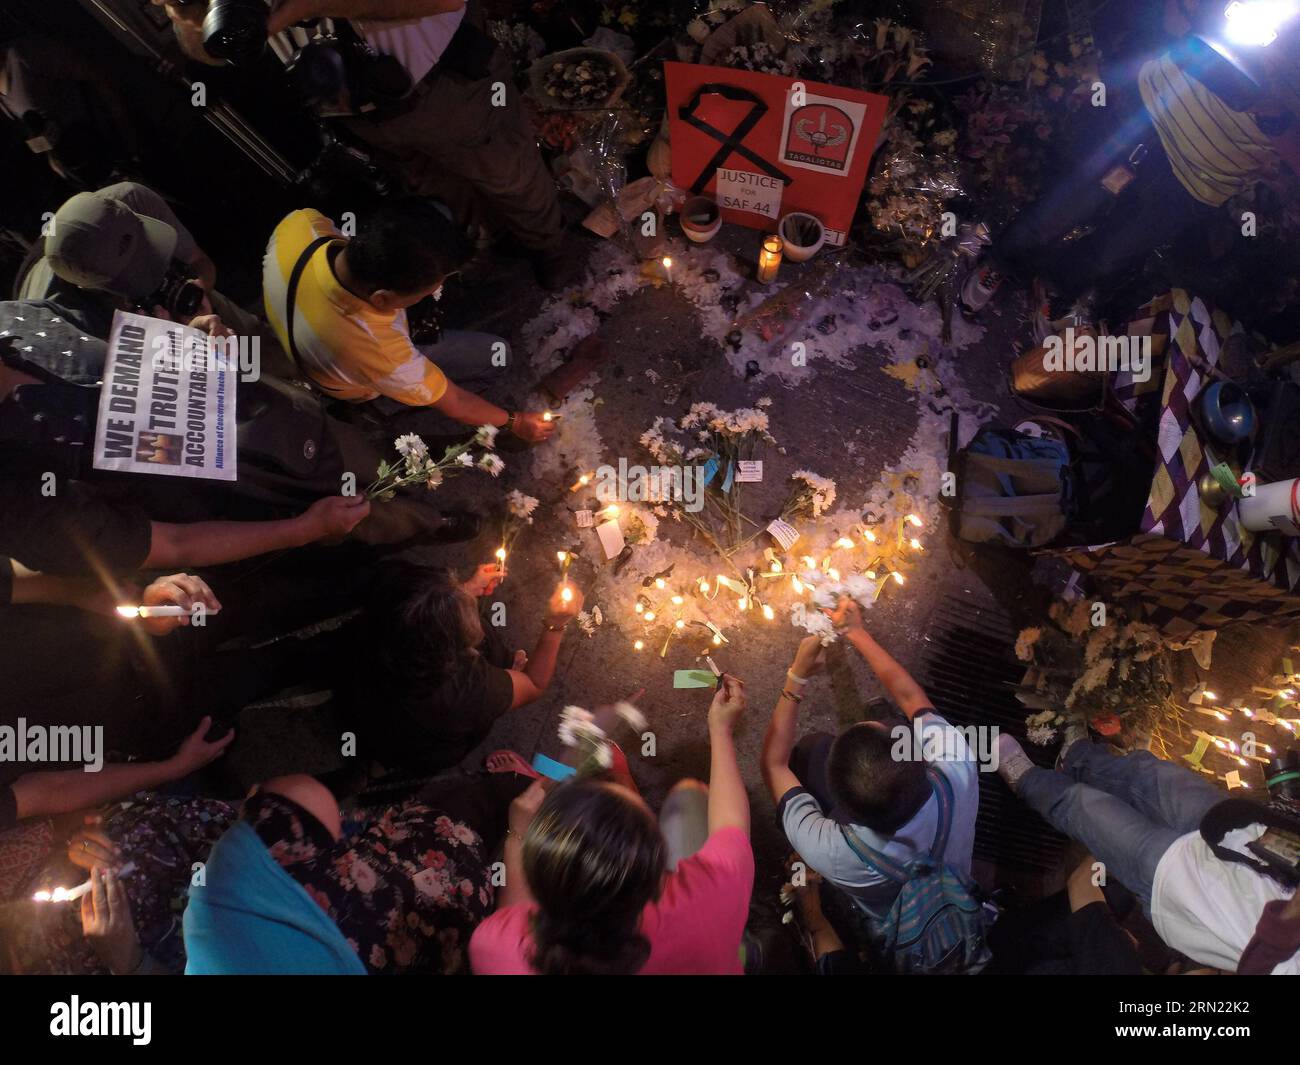 (150203) -- QUEZON CITY, Feb. 3, 2015 -- People light candles and offer flowers and prayers for the slain 49 members of the Philippine National Police Special Action Force (PNP-SAF) at the gate of the PNP Headquarters in Quezon City, the Philippines, Feb. 3, 2015. There was lack of coordination and planning between the military forces and the leadership of the PNP-SAF during the violent clash in Mamasapano, Maguindanao on Jan. 25, chief of the Armed Forces of the Philippines said on Tuesday. ) (lmz) PHILIPPINES-QUEZON CITY-CANDLE LIGHTING RouellexUmali PUBLICATIONxNOTxINxCHN   Quezon City Feb Stock Photo